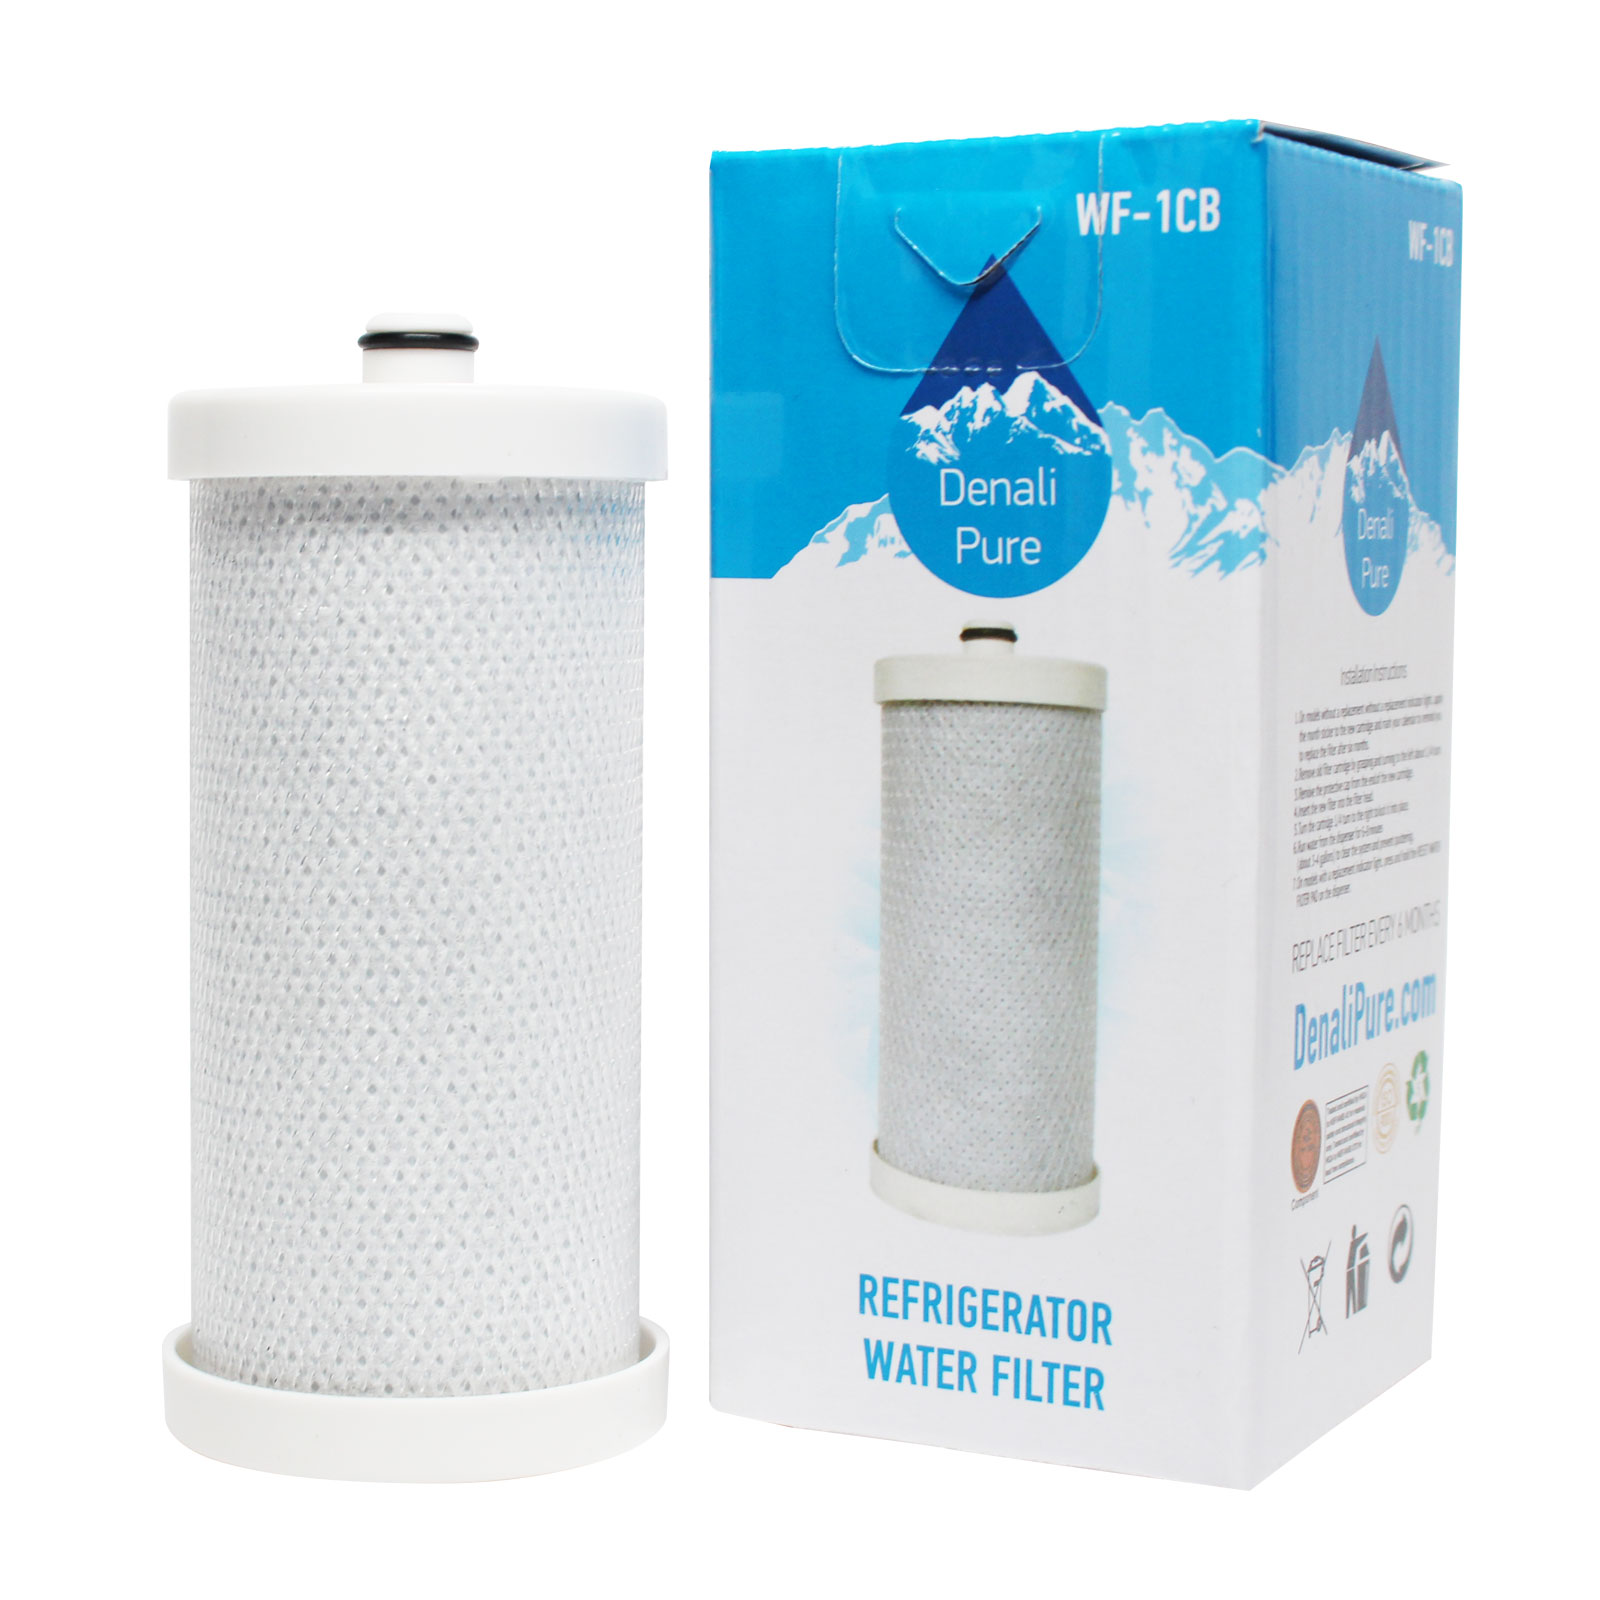 2-Pack Compatible with Frigidaire FRS26R4CW3 Refrigerator Water Filter - Compatible with Frigidaire WF1CB, WFCB Fridge Water Filter Cartridge - image 2 of 4